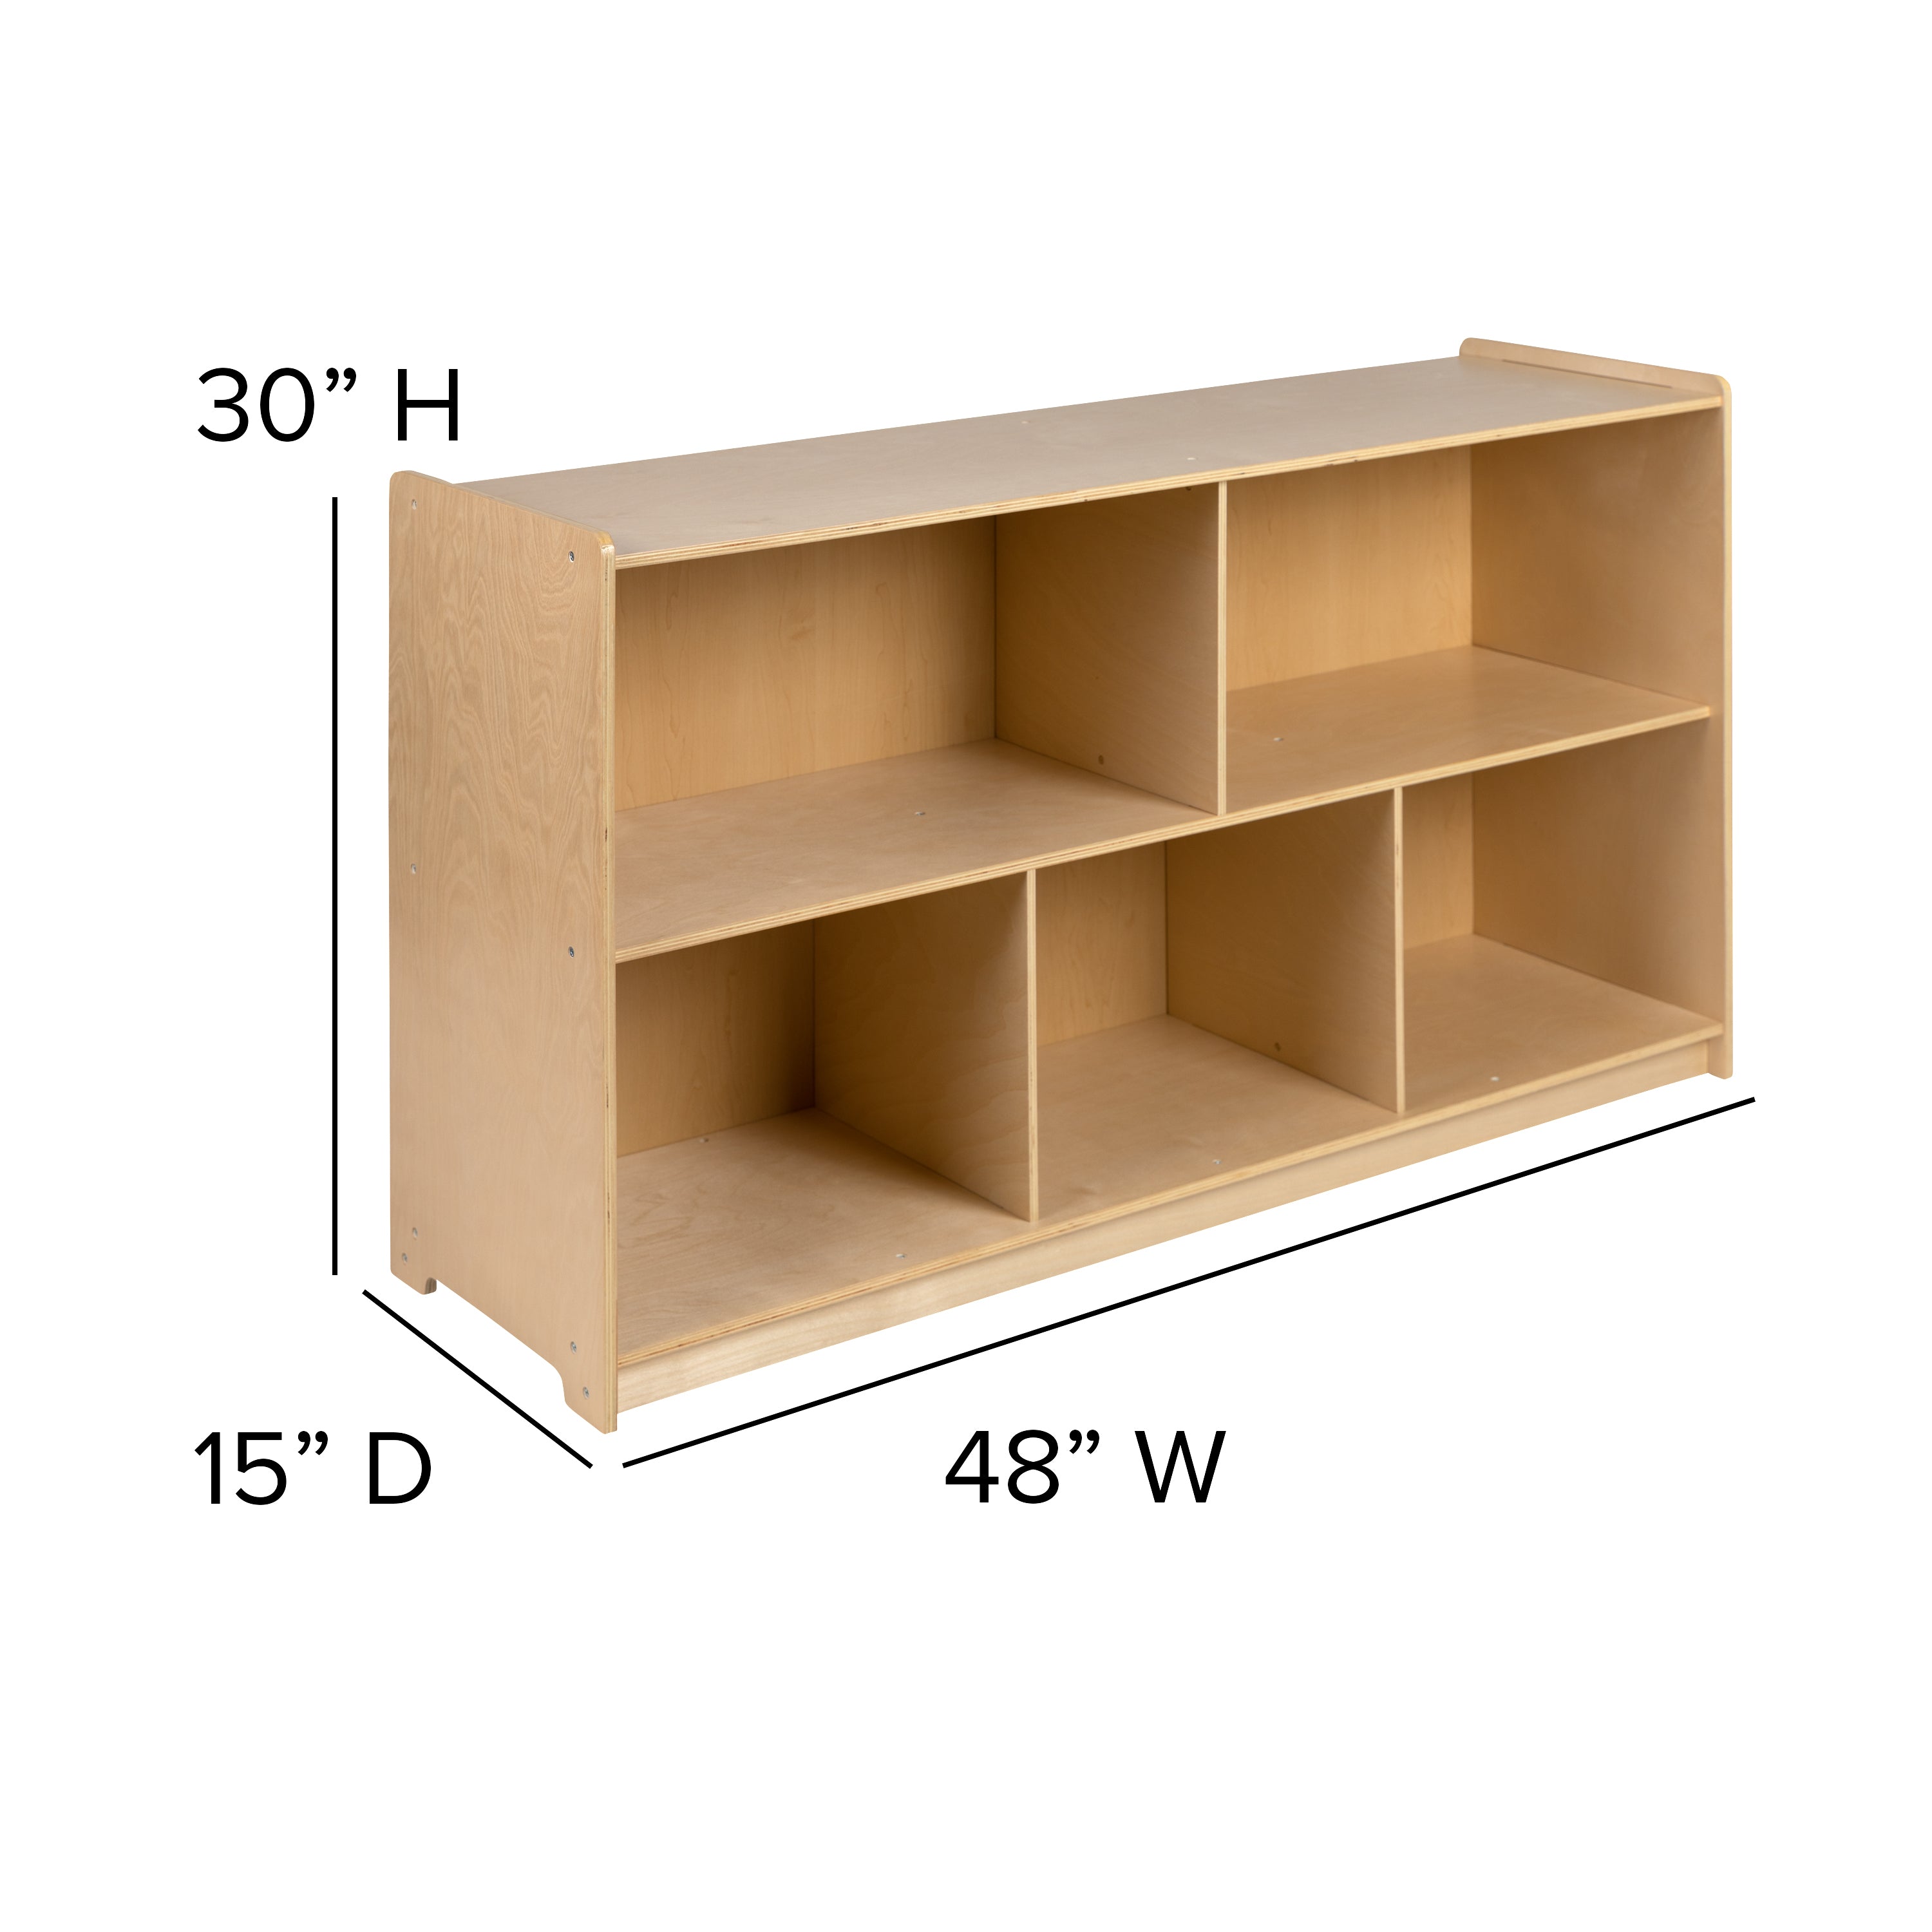 Wooden School Classroom Storage Cabinet/Cubby for Commercial or Home Use - Safe, Kid Friendly Design (Natural)-Classroom Storage-Flash Furniture-Wall2Wall Furnishings